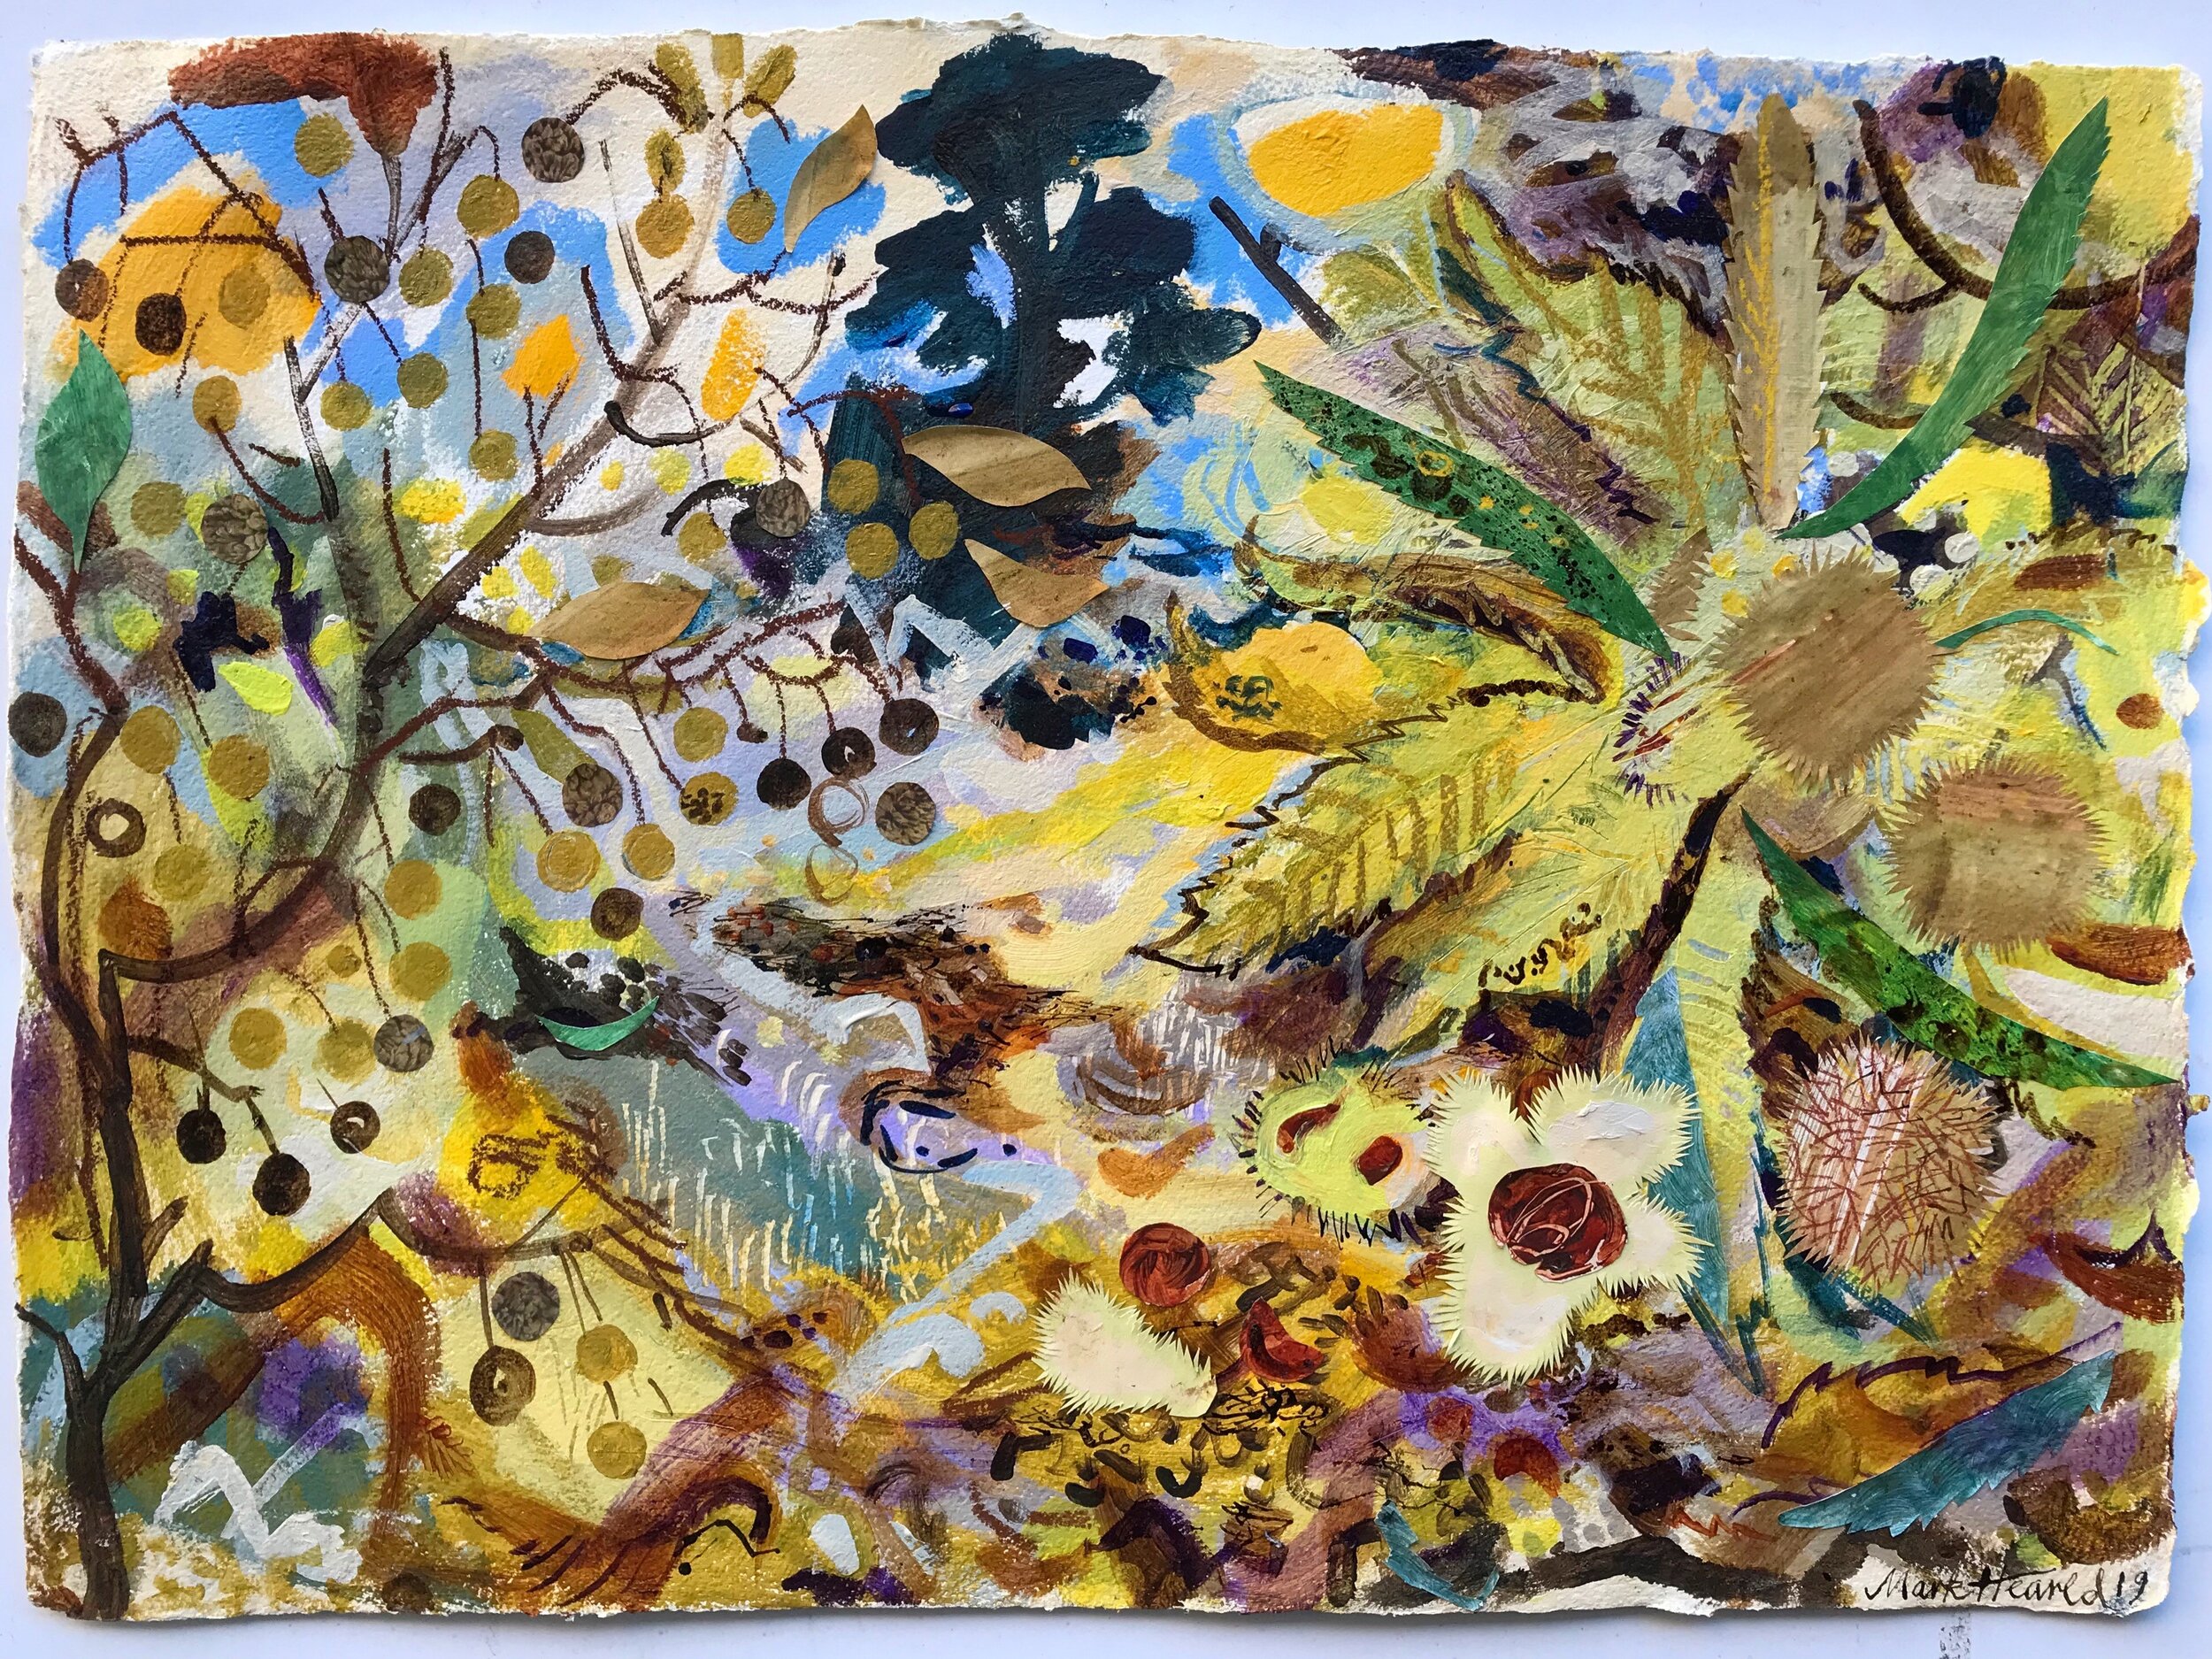 Acclaimed Artist Mark Hearld Debuts New Exhibition Inspired by the Yorkshire Arboretum